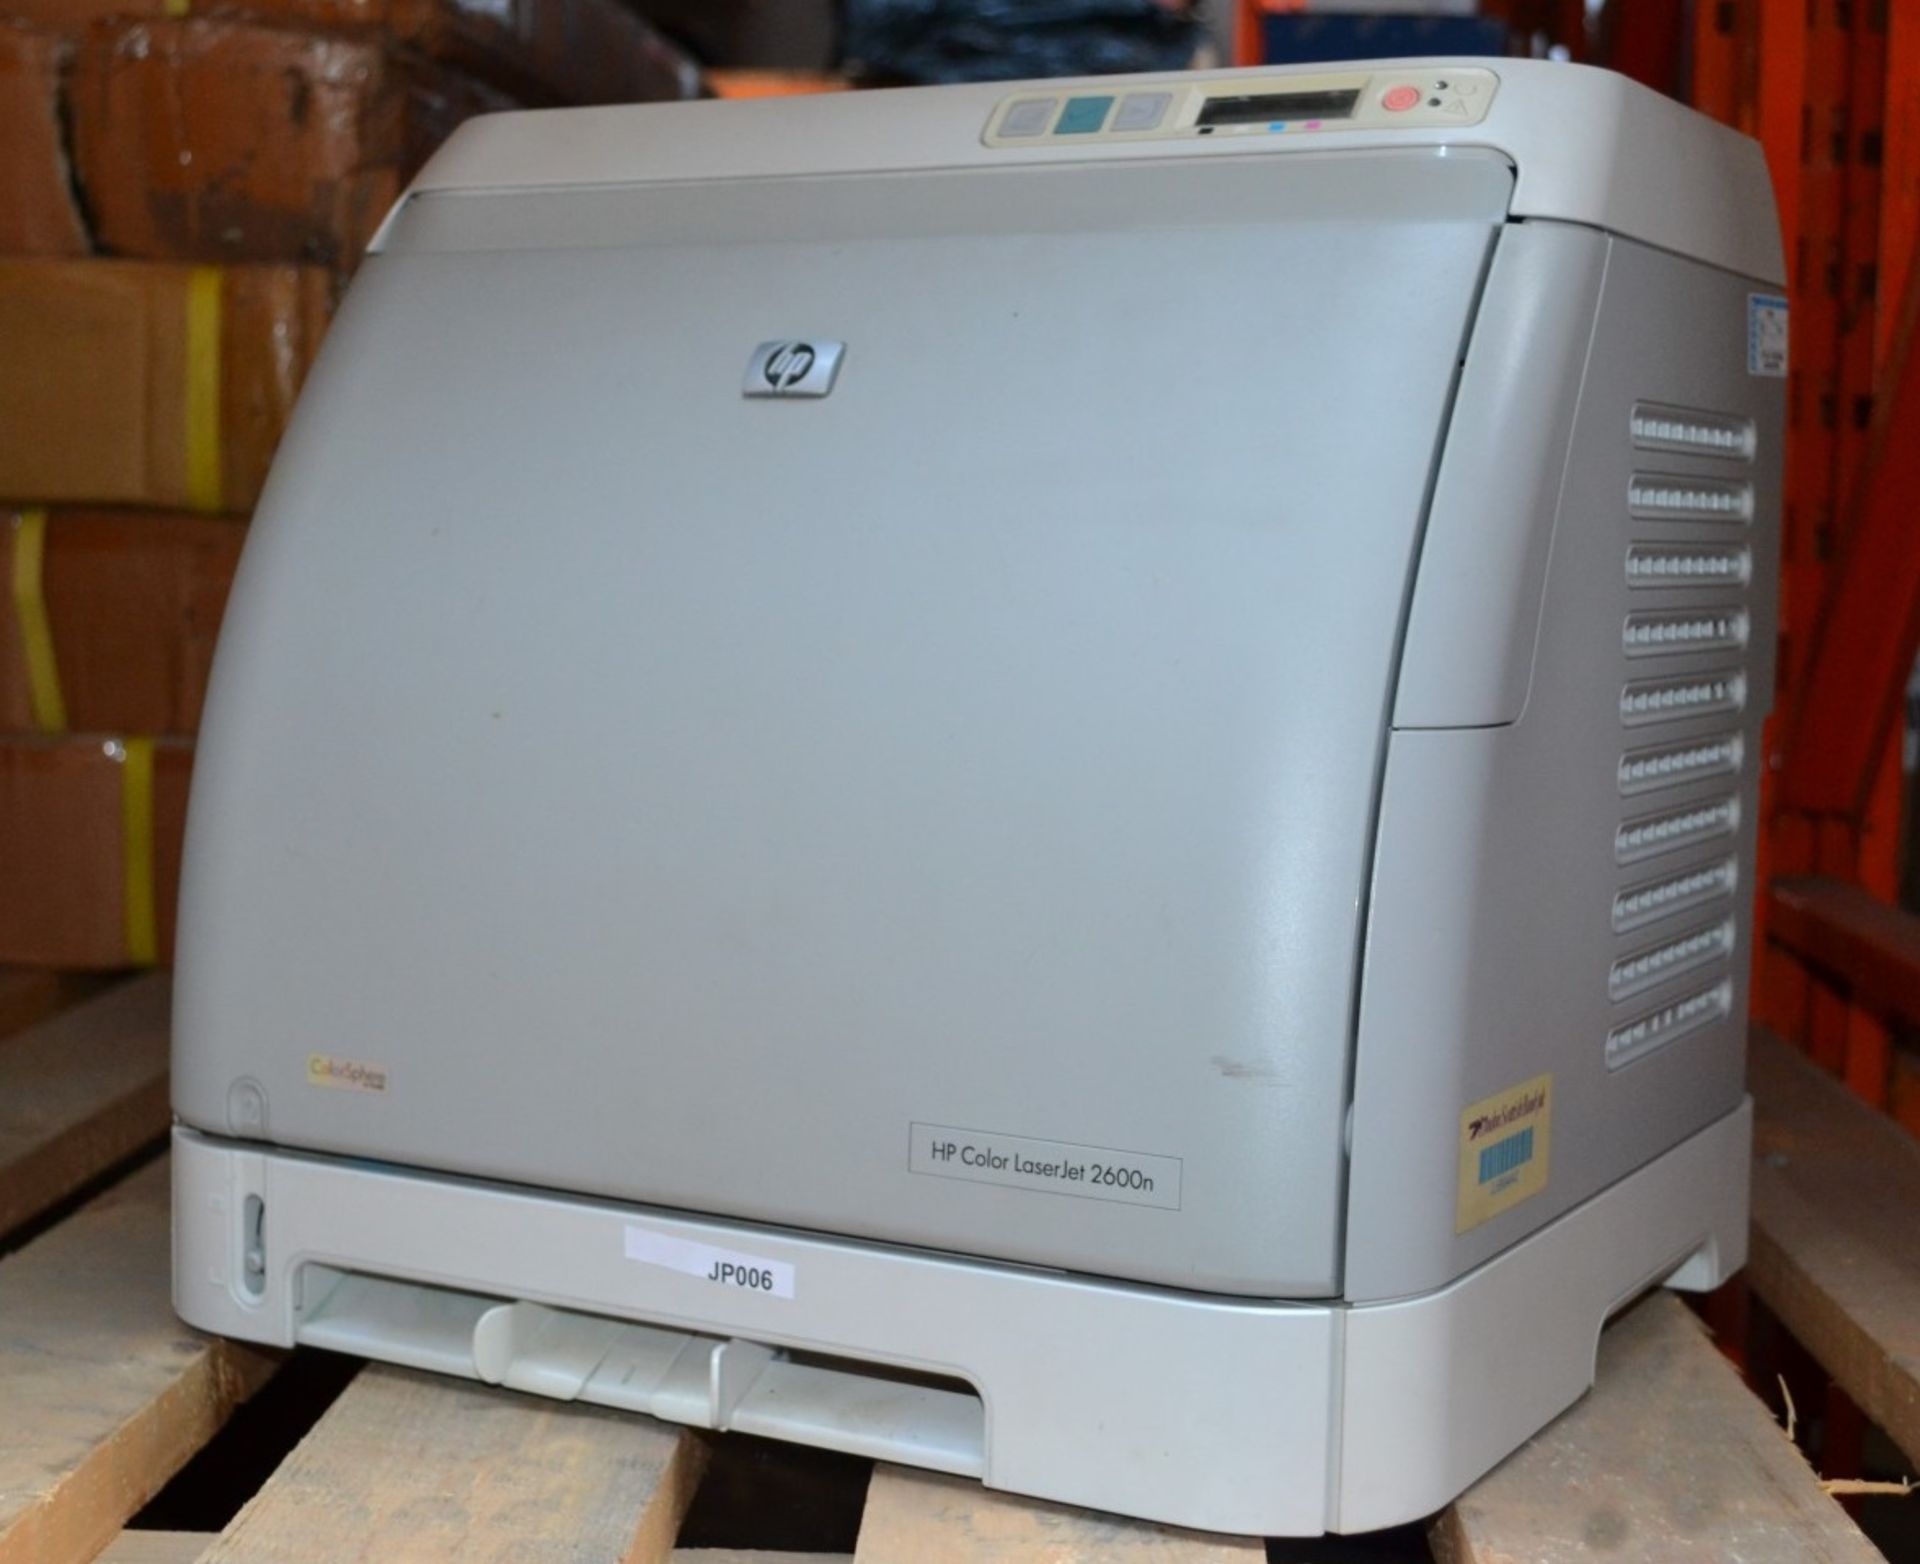 1 x HP Colour Laserjet Printer - Model 2600n - Removed From Office Environment - CL011 - Ref JP006 -